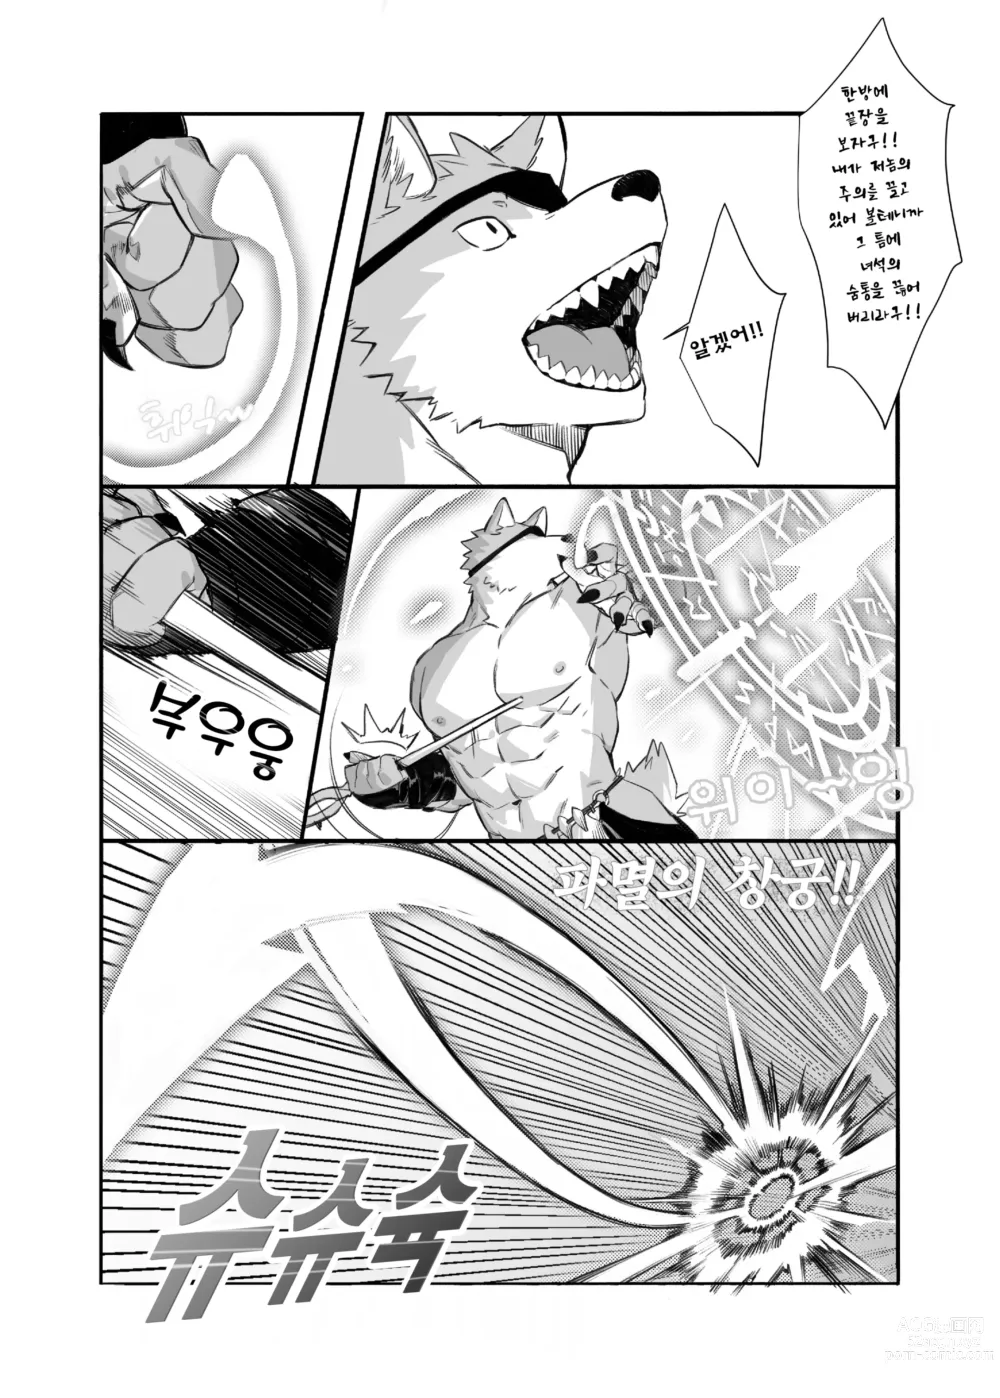 Page 6 of doujinshi Bros. in Heat